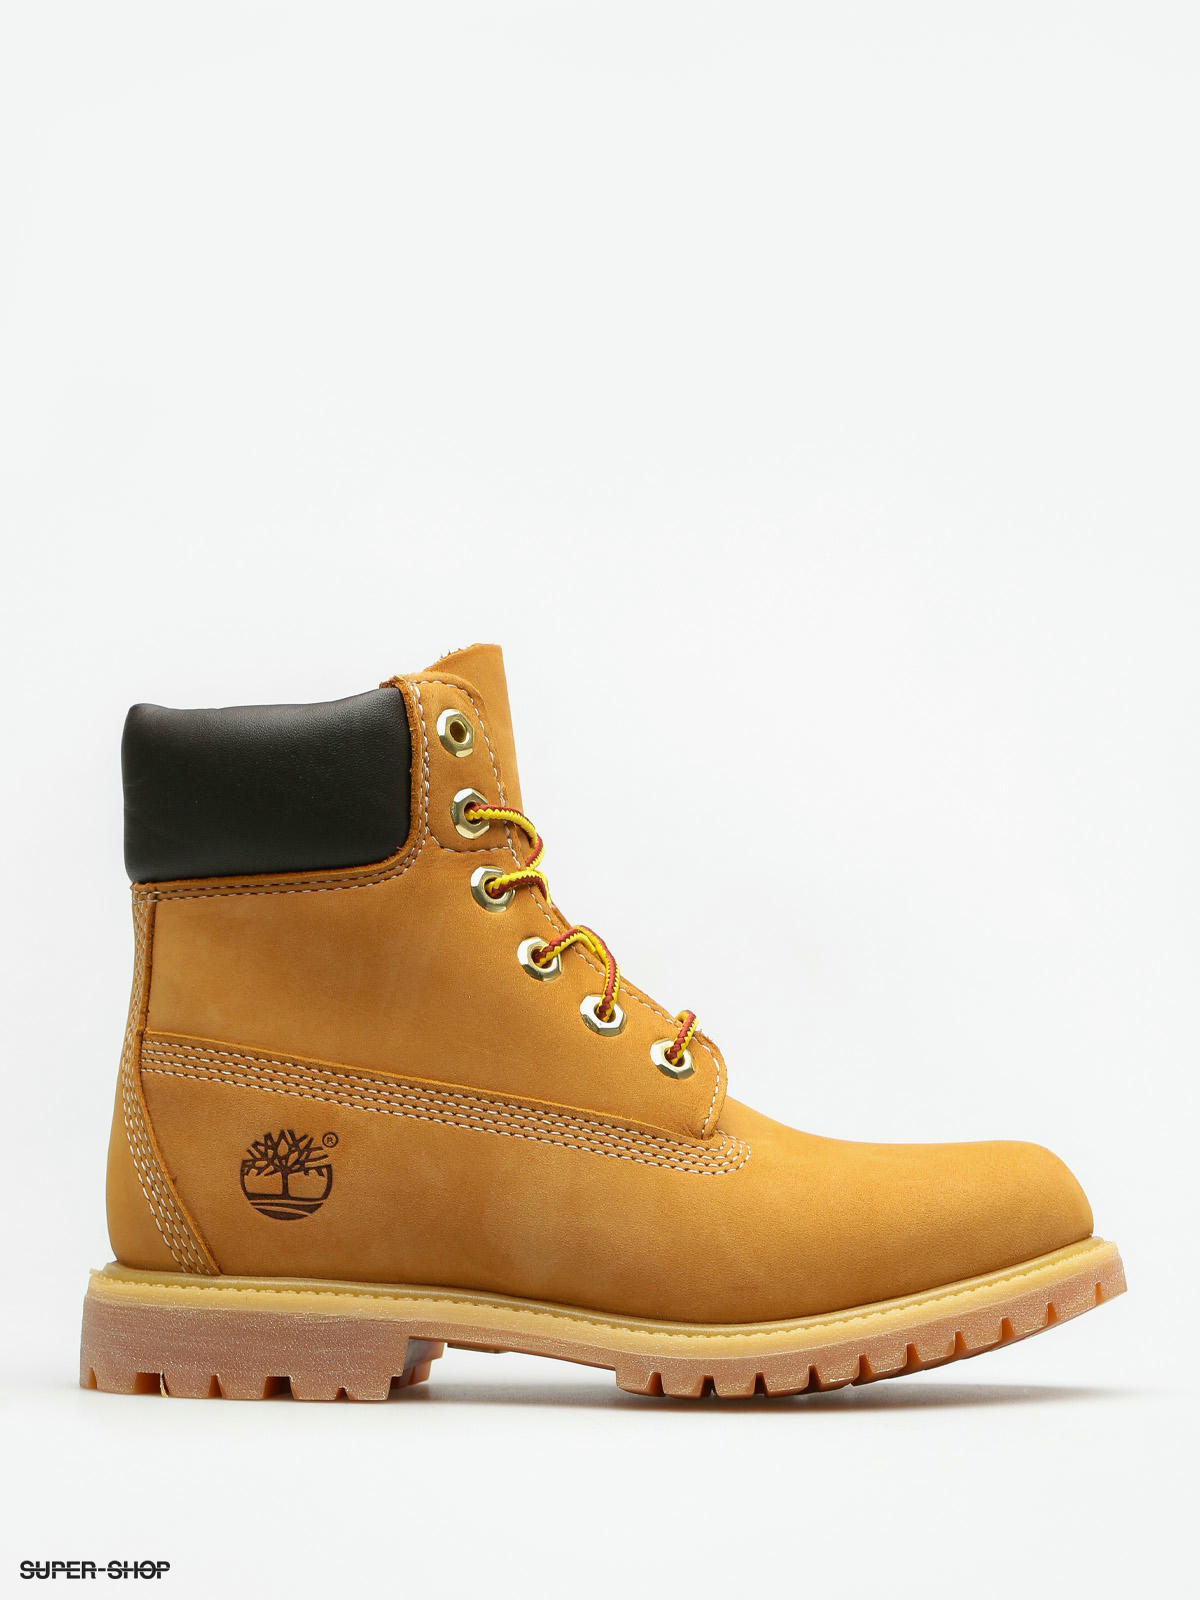 Timberland winter shoes 6 In Premium Wmn (wheat nb yell)